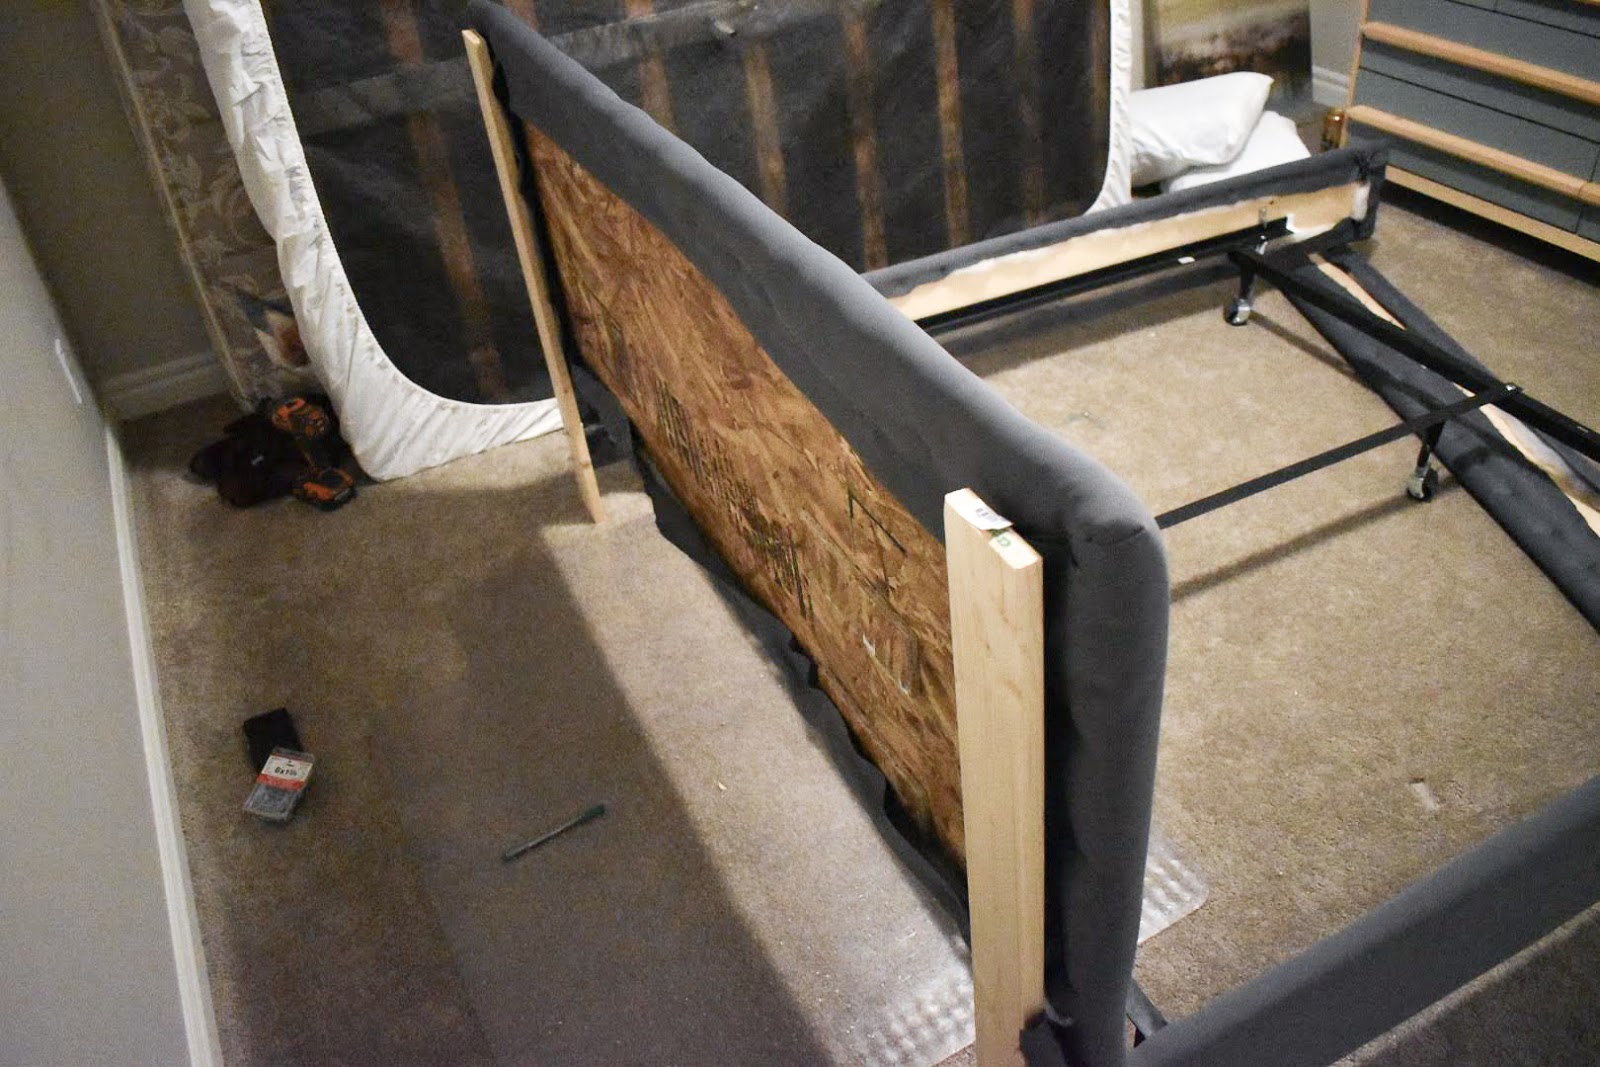 Metal Bed Frame Into An Upholstered, How To Attach Headboard Frame